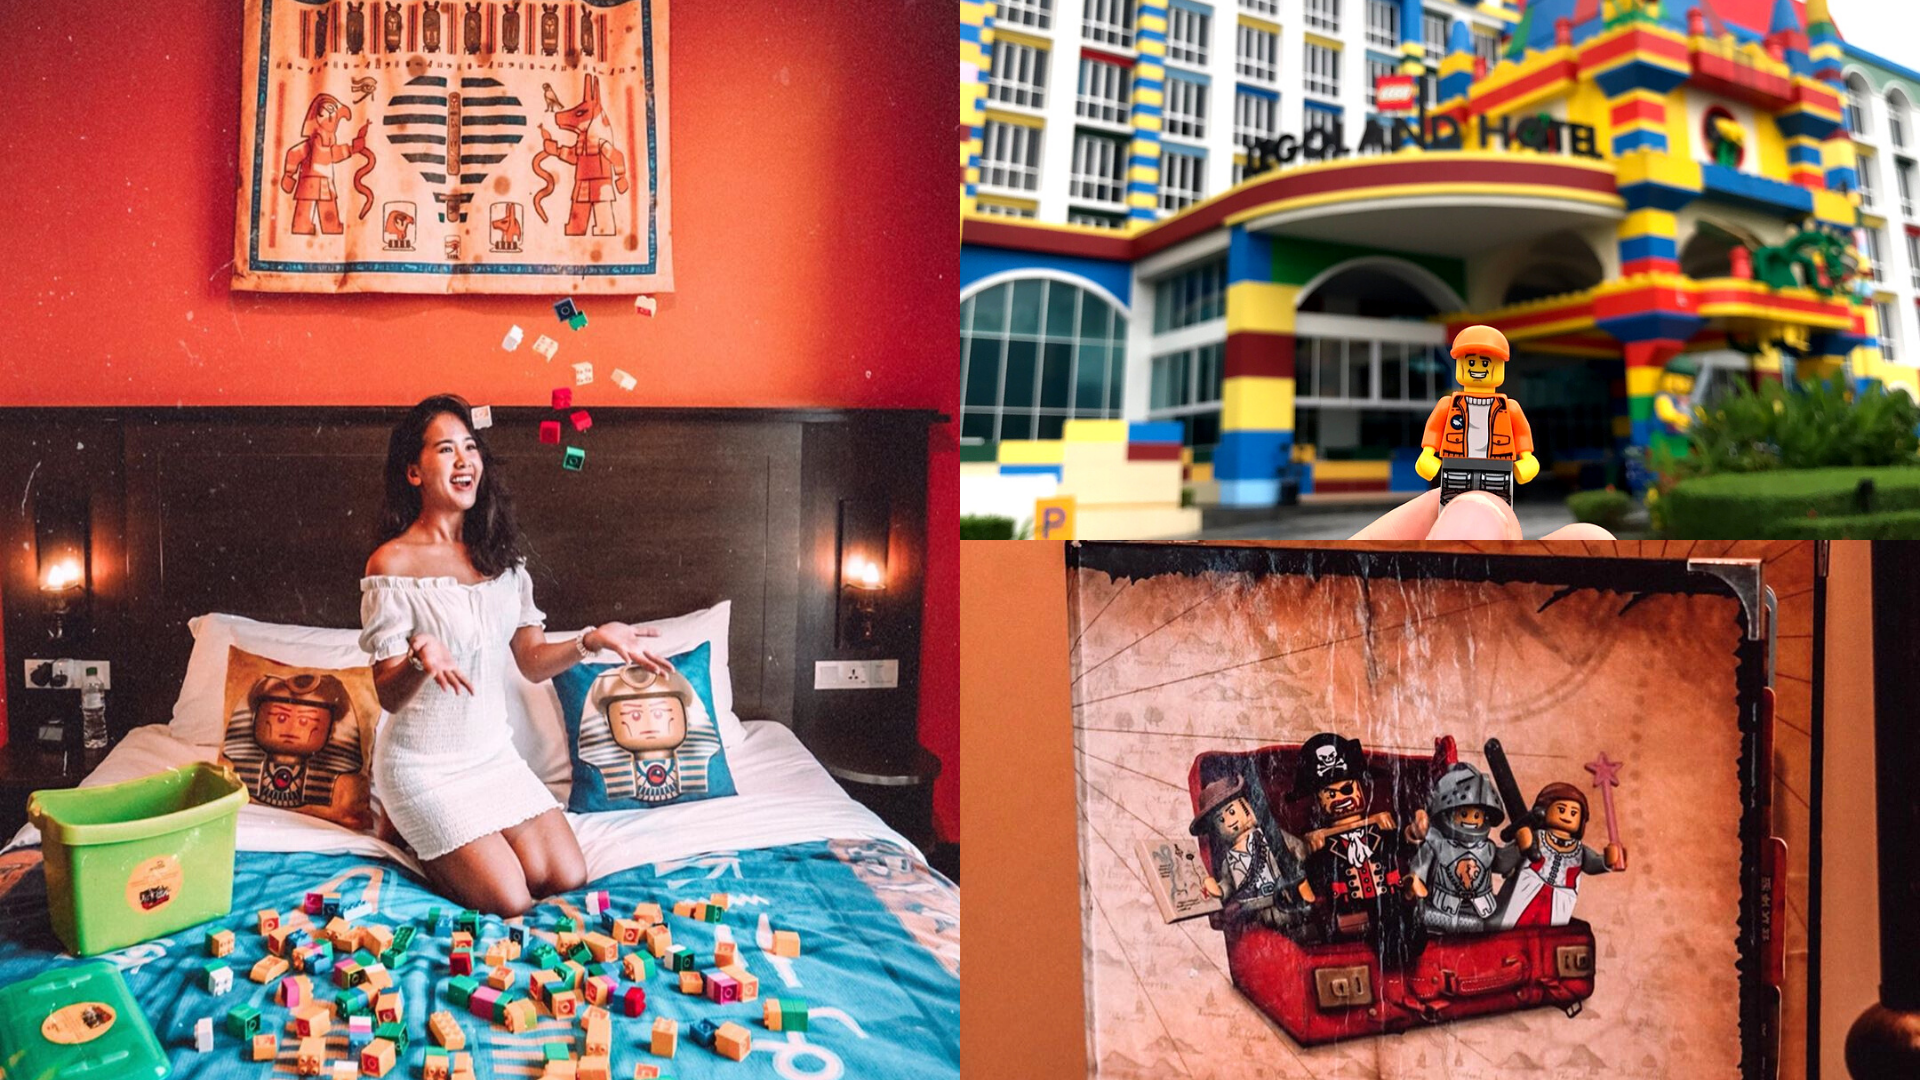 Live Out Your Wildest Lego Dreams At Legoland Hotel Malaysia In Johor Bahru Klook Travel Blog